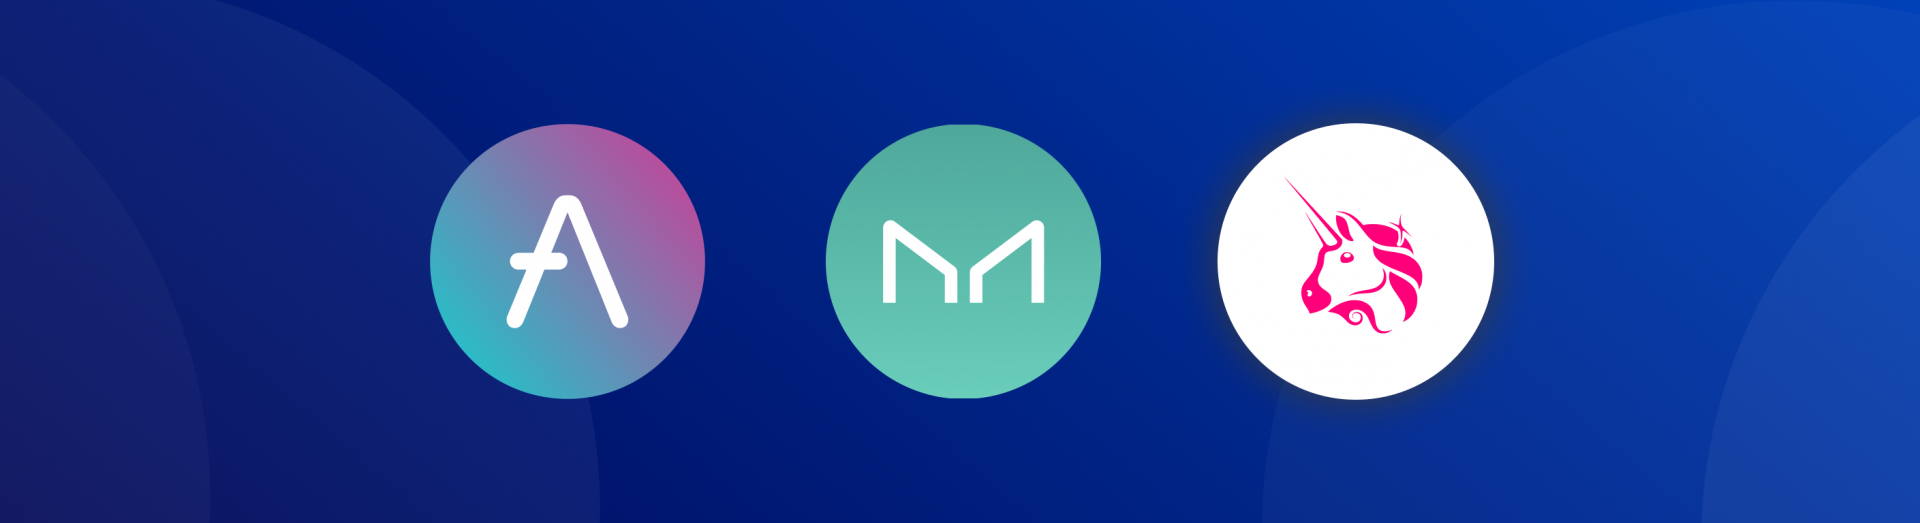 Examples of governance tokens: AAVE, MKR, UNI. Different Types of Crypto Tokens Explained